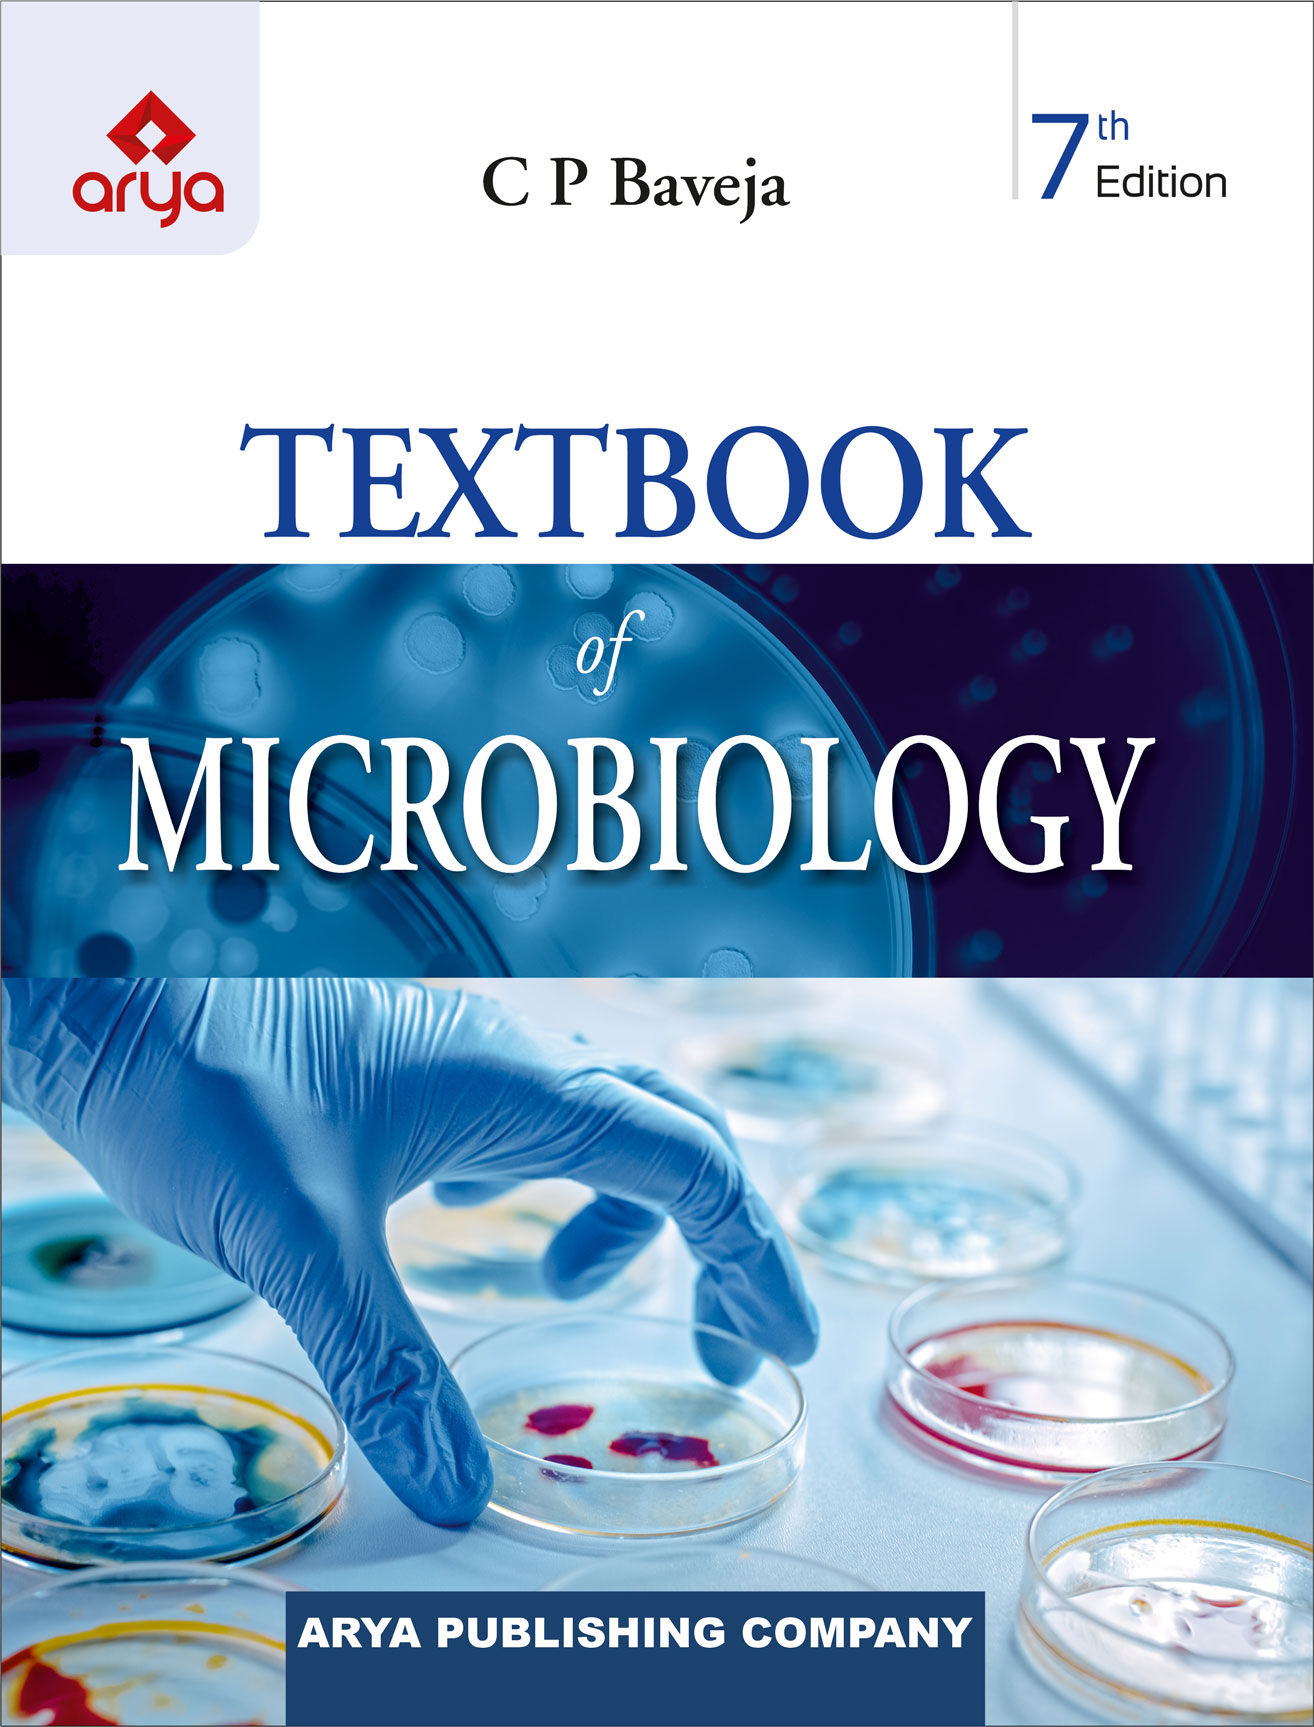 Textbook of Microbiology 